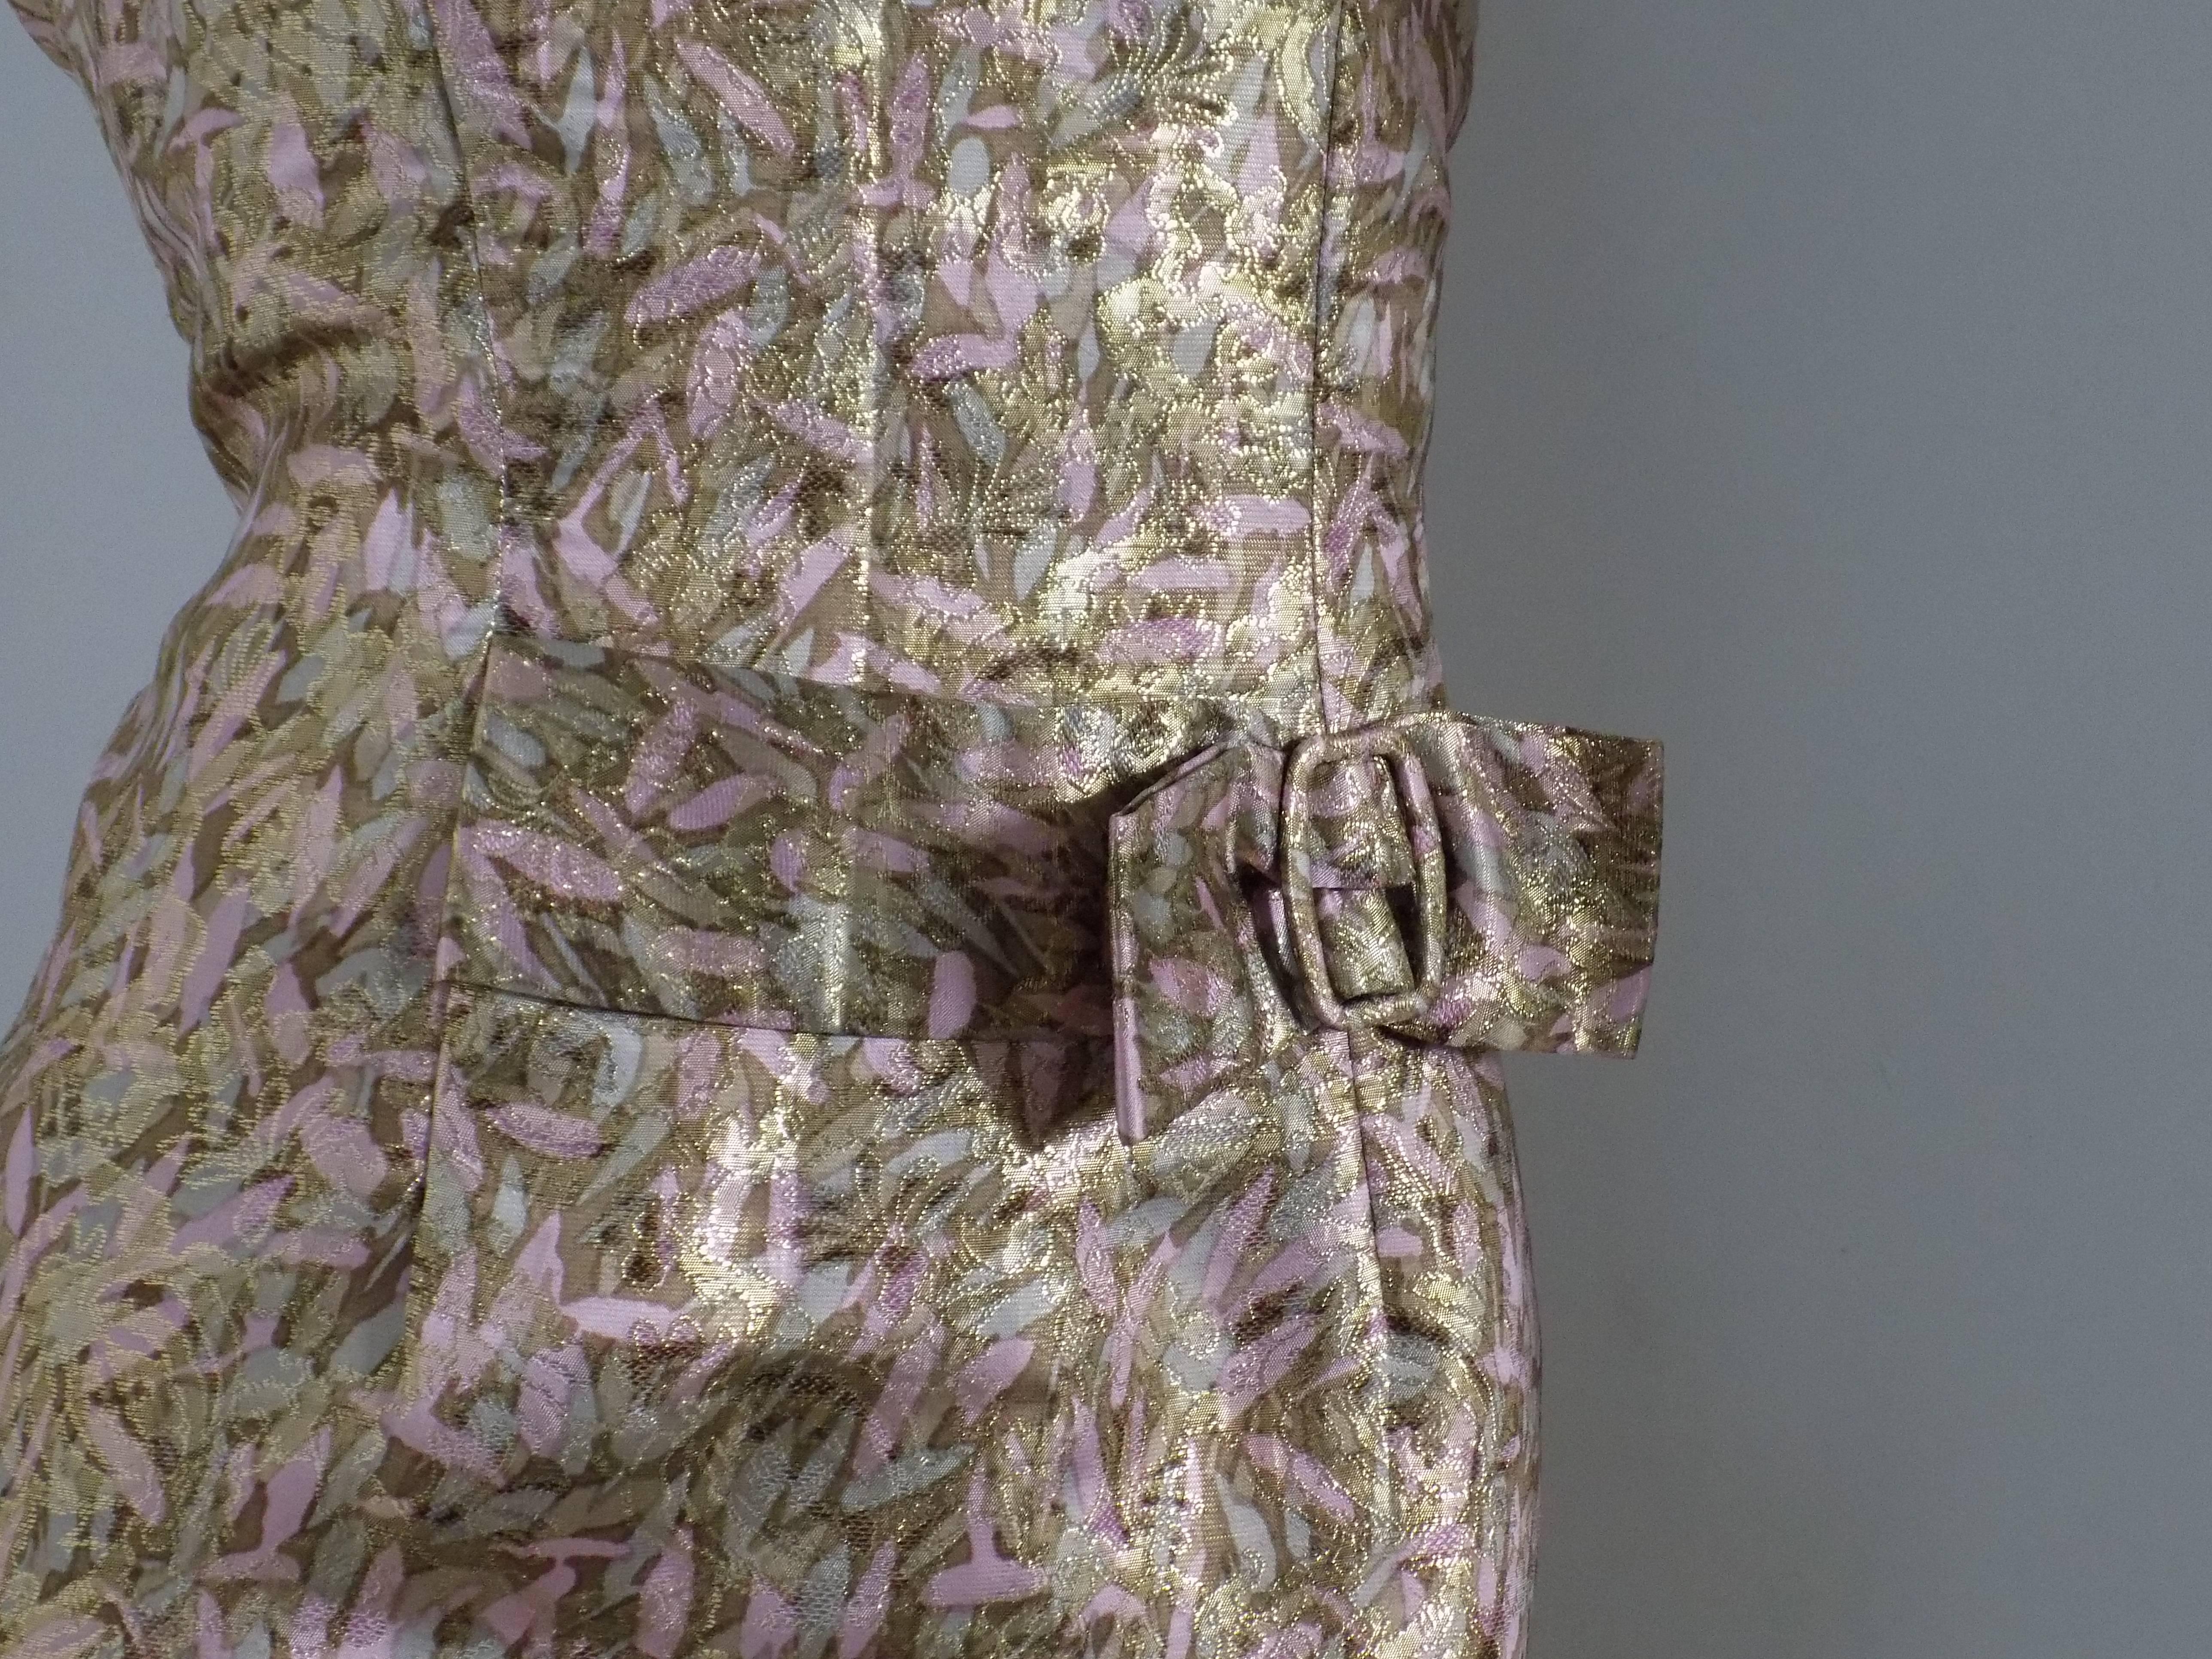 1980s Tailored Dress

Gold tone with flowers printed on it dress